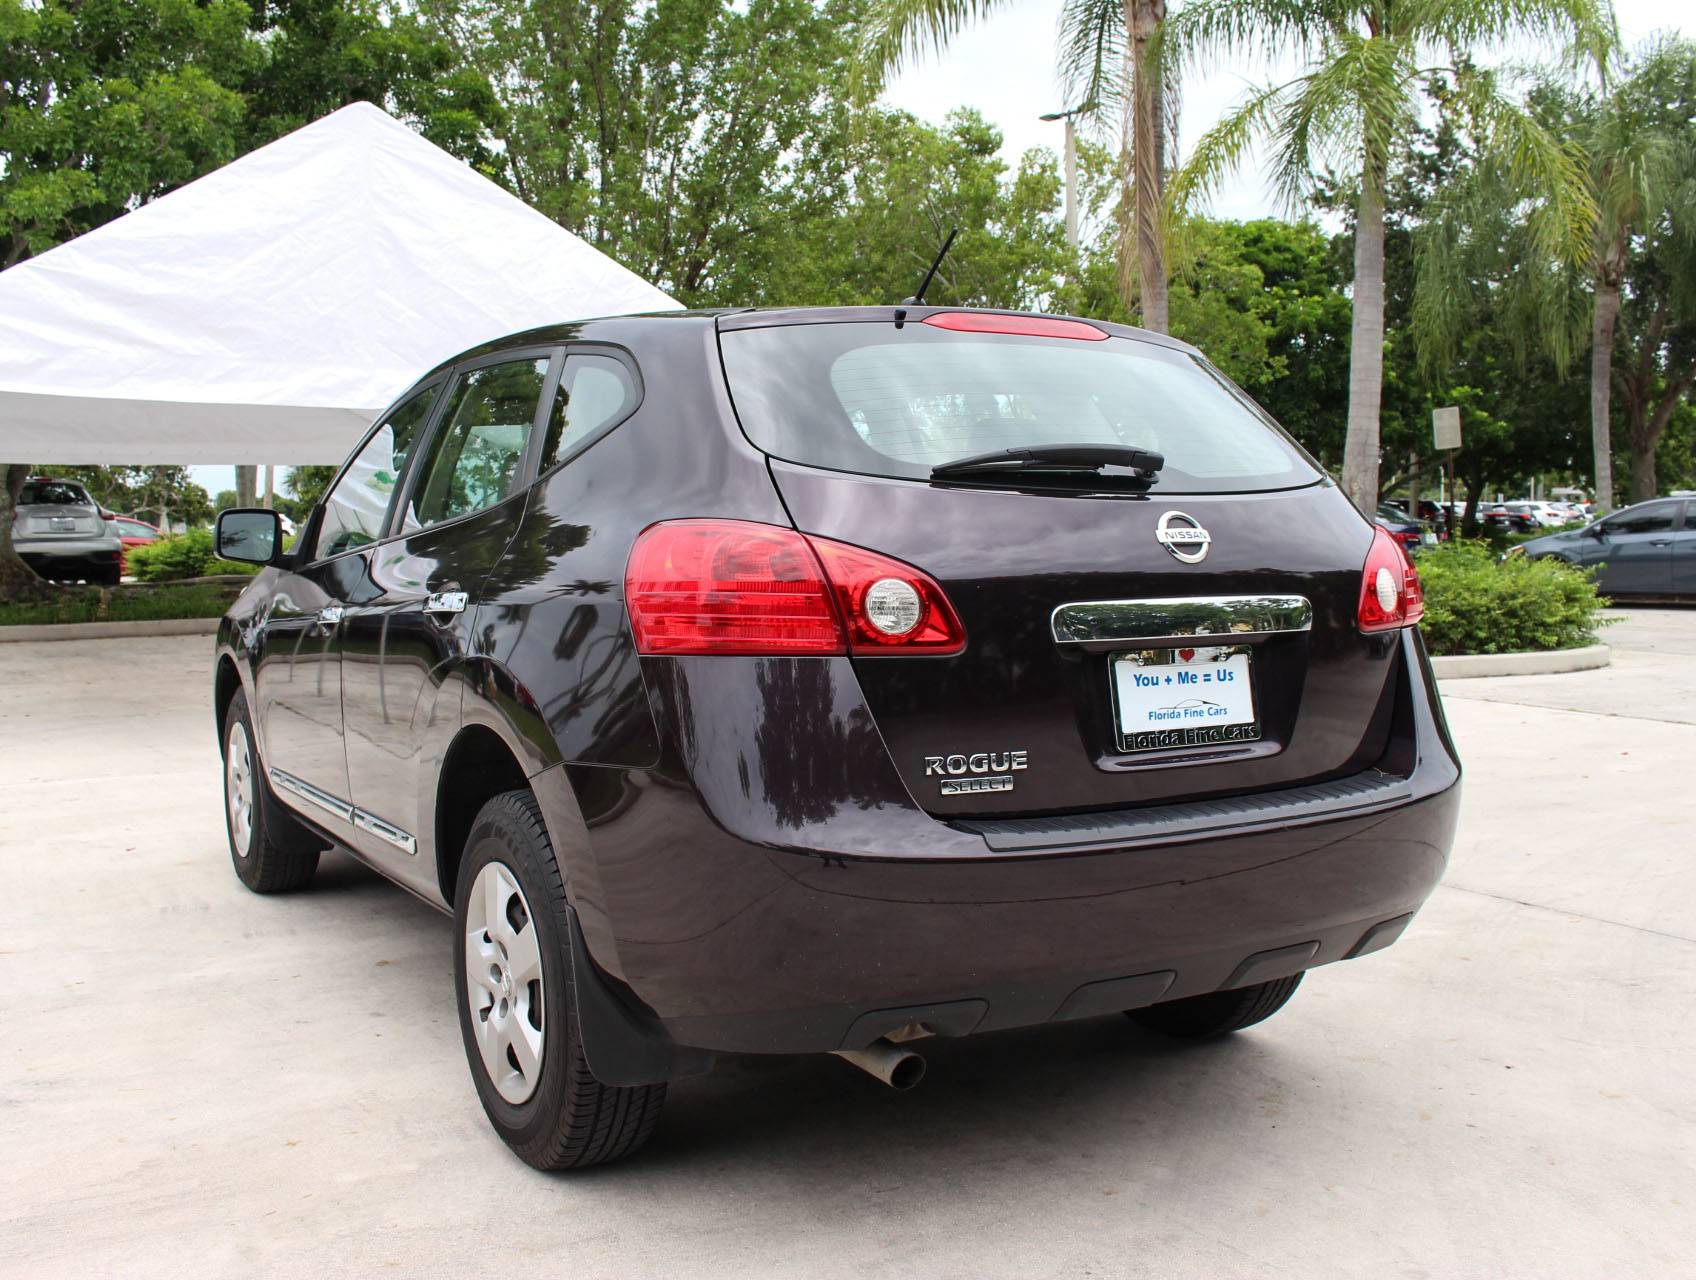 Florida Fine Cars - Used NISSAN ROGUE SELECT 2015 MARGATE S